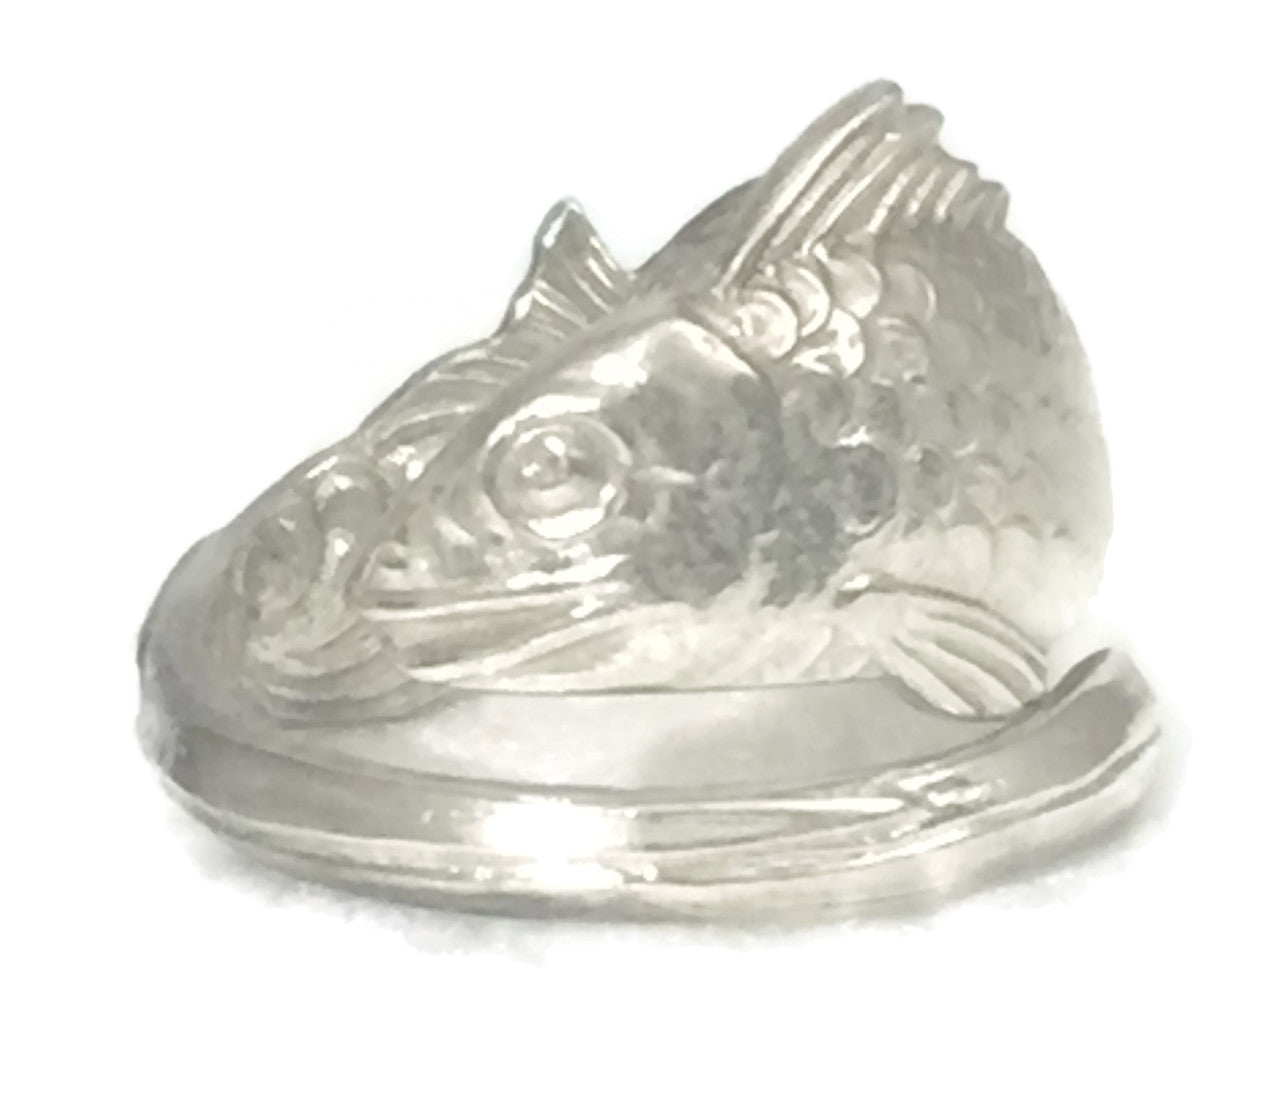 Spoon Fish Ring Vintage Sterling Silver Band Size 9